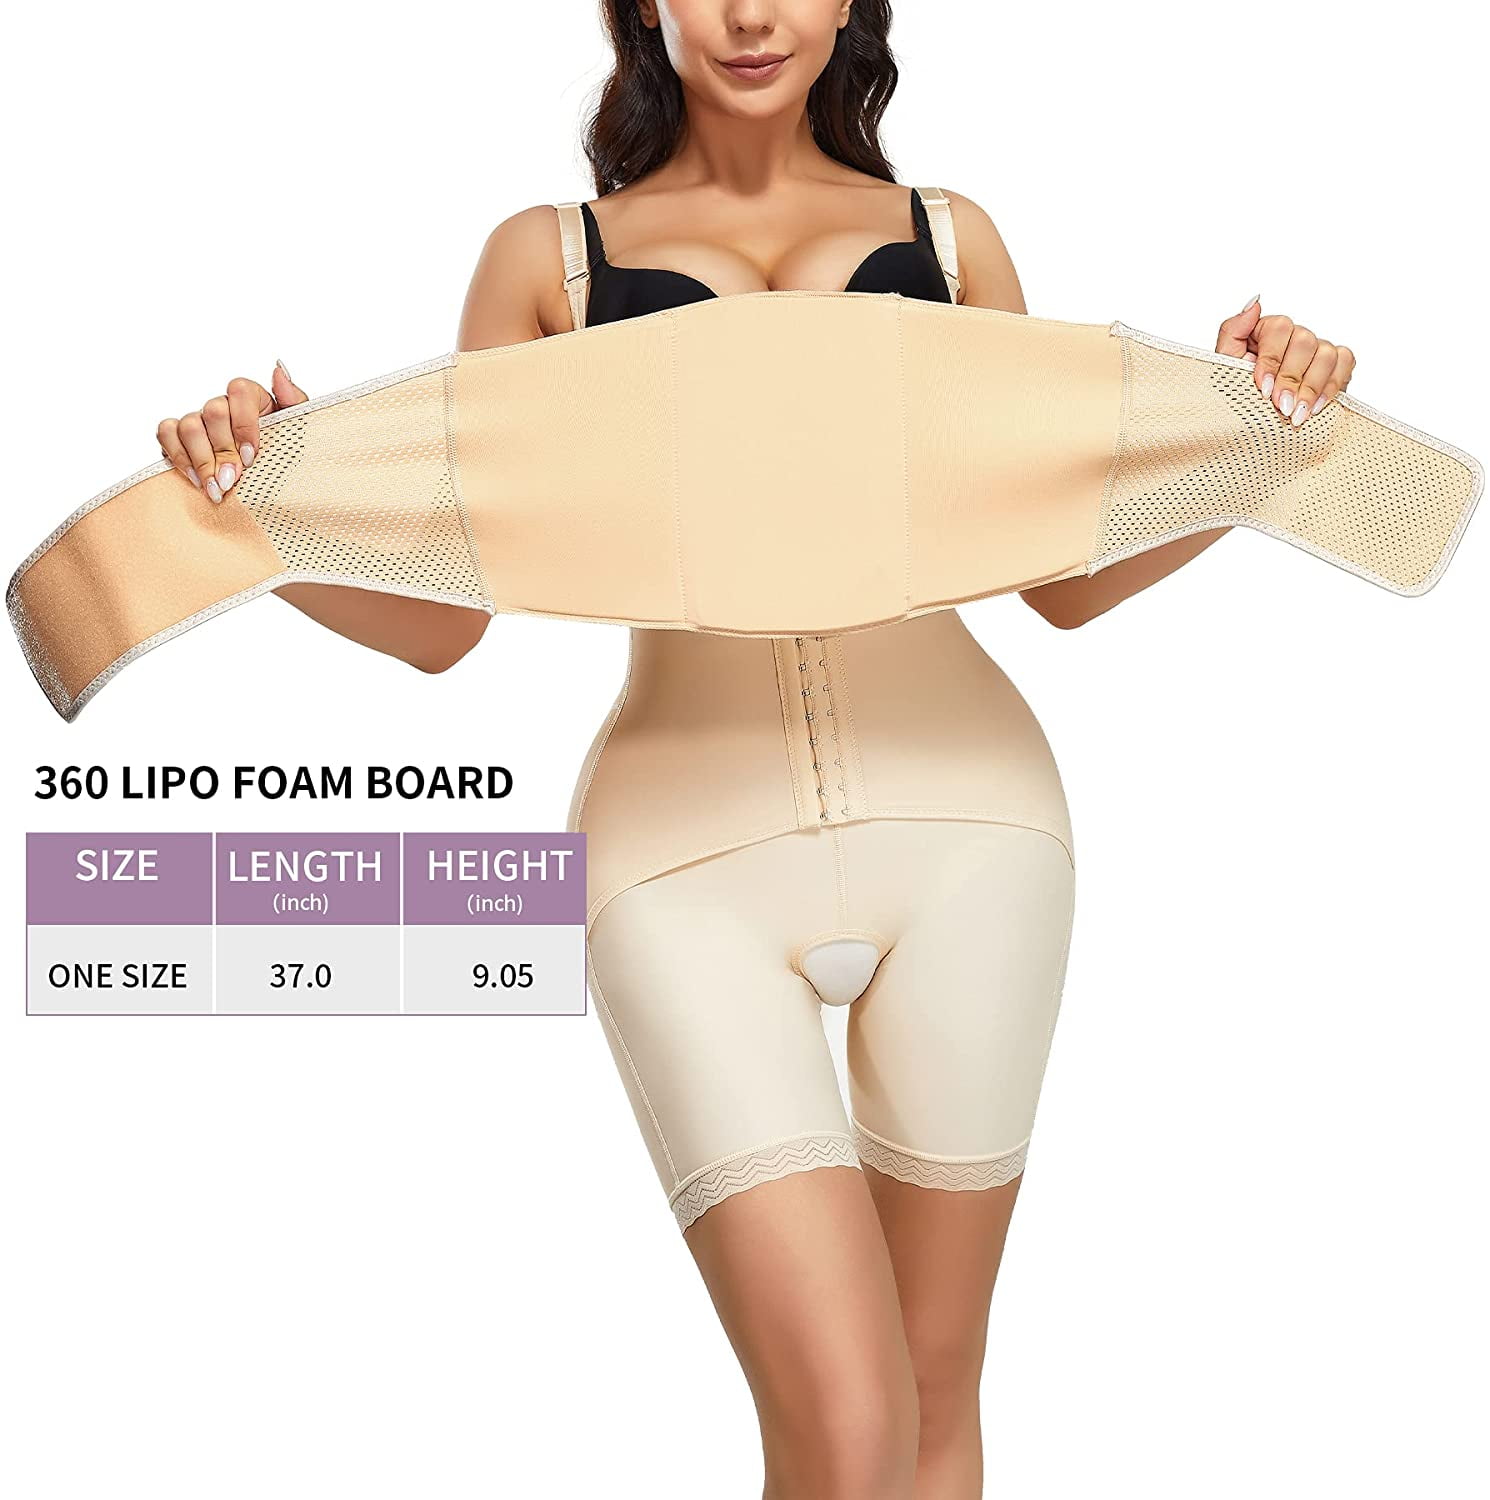 Belo Body Care Ab Lipo Foams and Boards. 5 Pack Professional Lipo Foam Pads  for 360 Wrap Around. Thick 8x11 Tabla Abdominal Post Surgery Liposuction  Compression Garments. Back Board after Lipo Sheets.